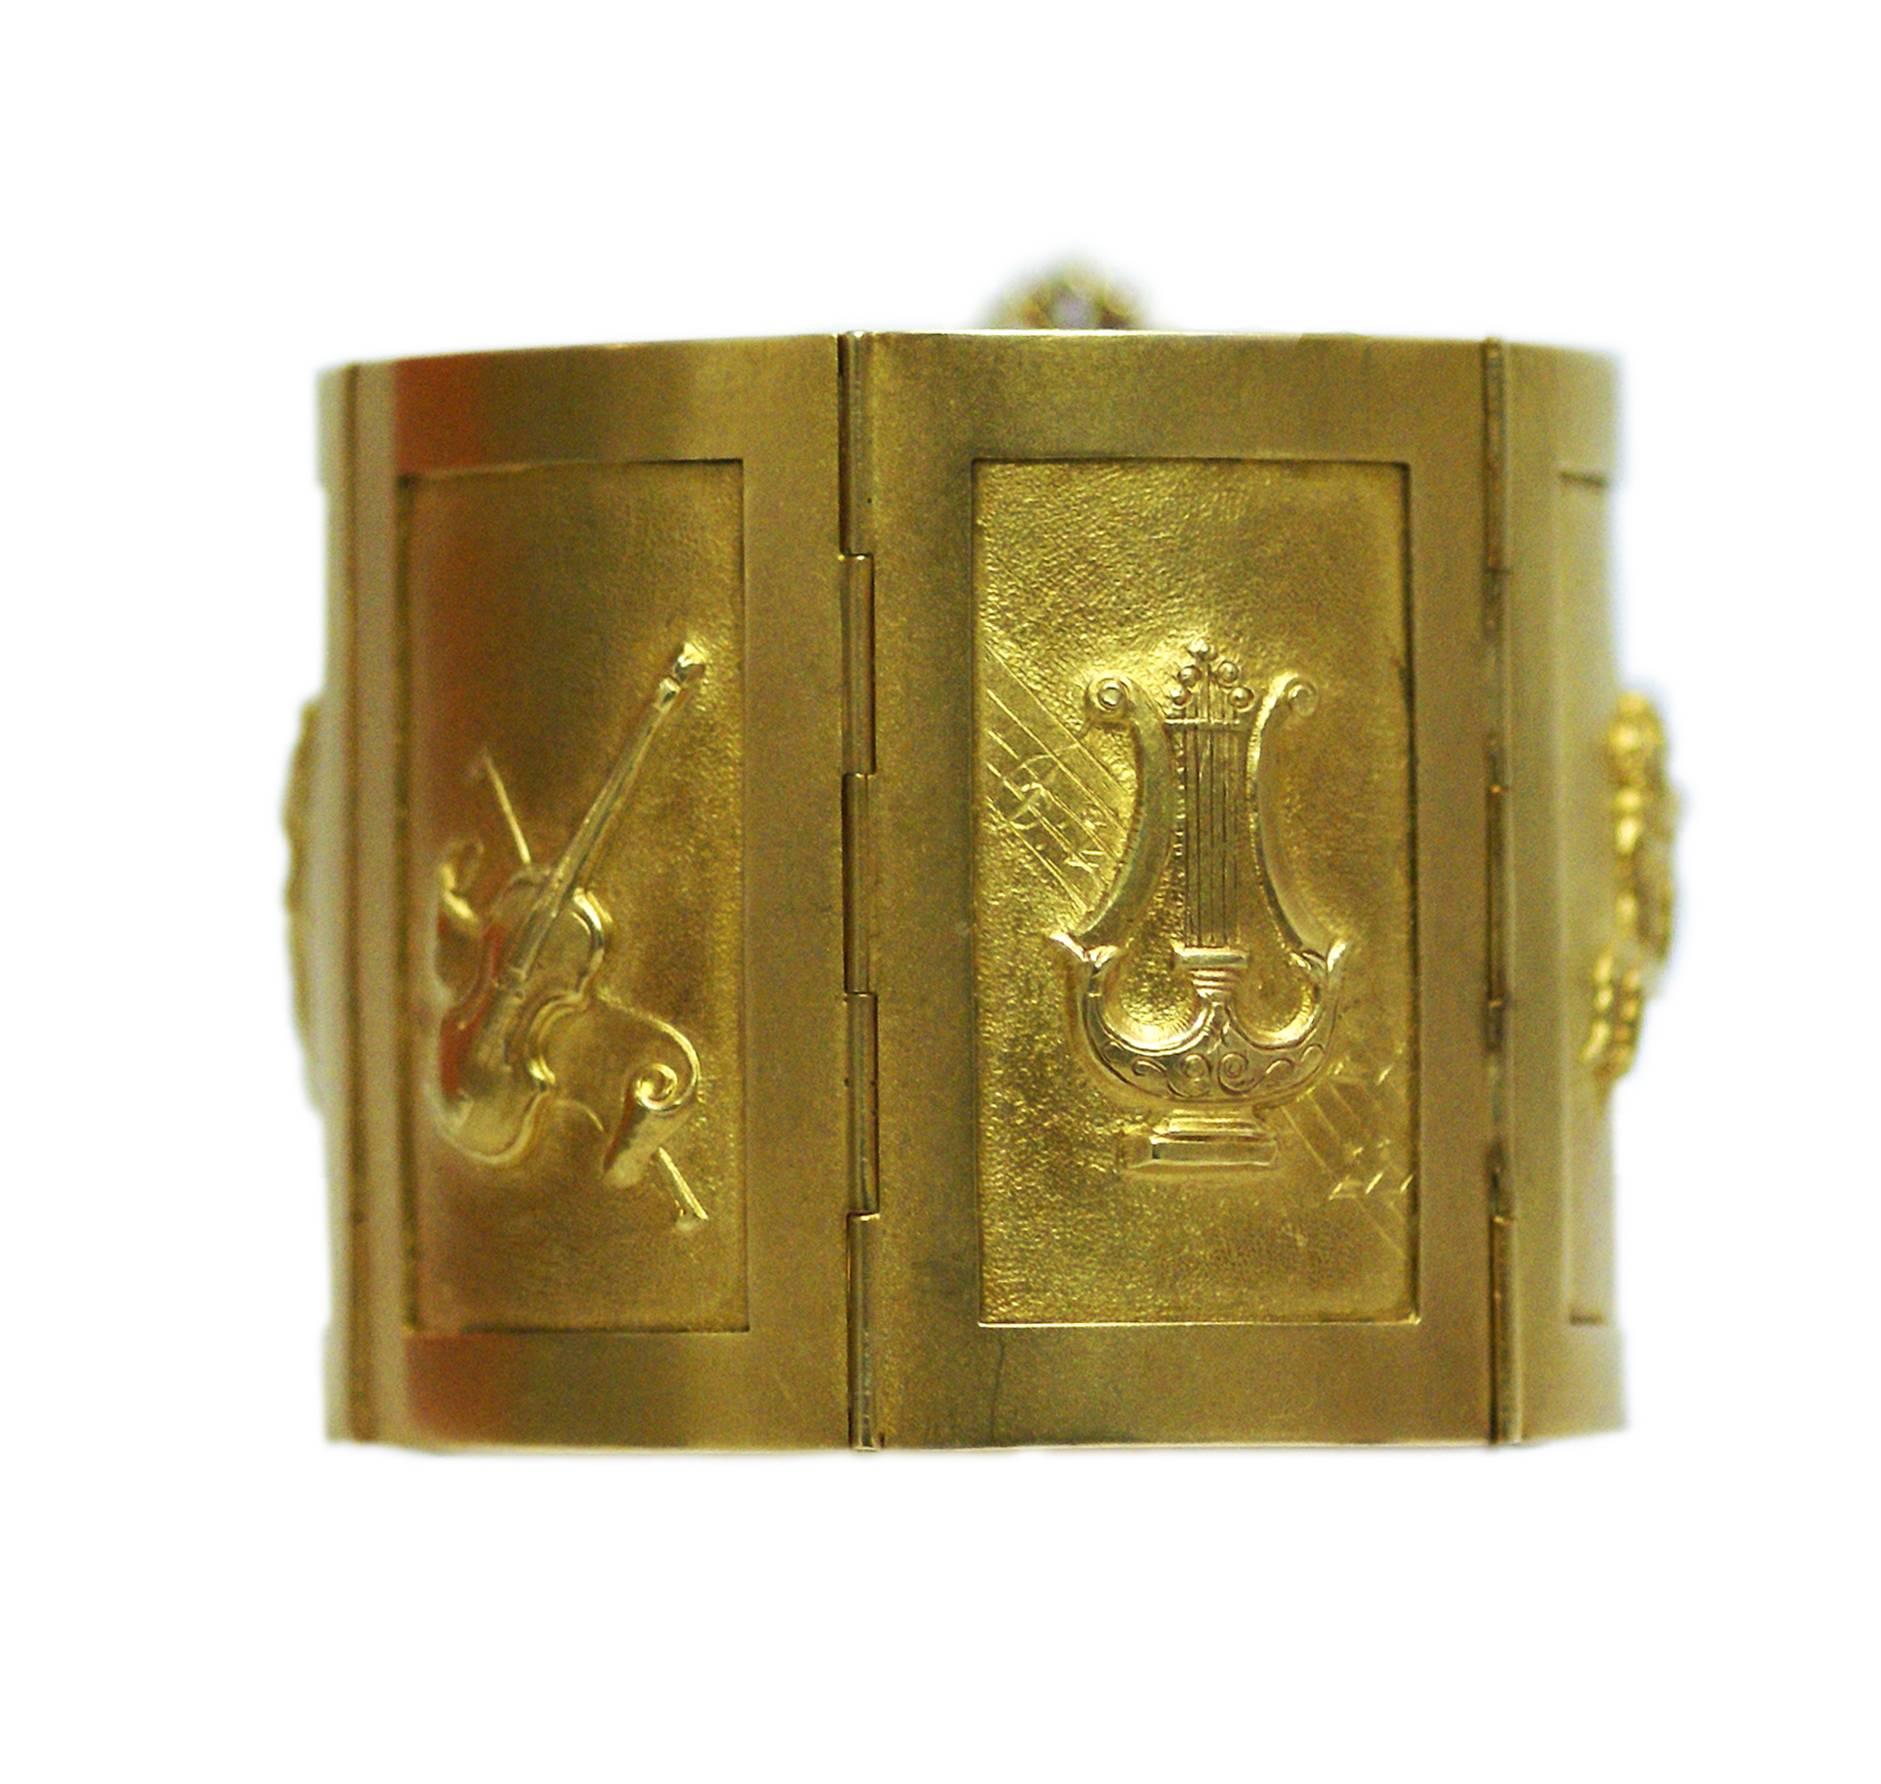 An unusual and large gold bracelet by historical Roman jeweler Mortet, representing musical instruments, mythological scenes and Trajan's column in Rome. Circa 1975